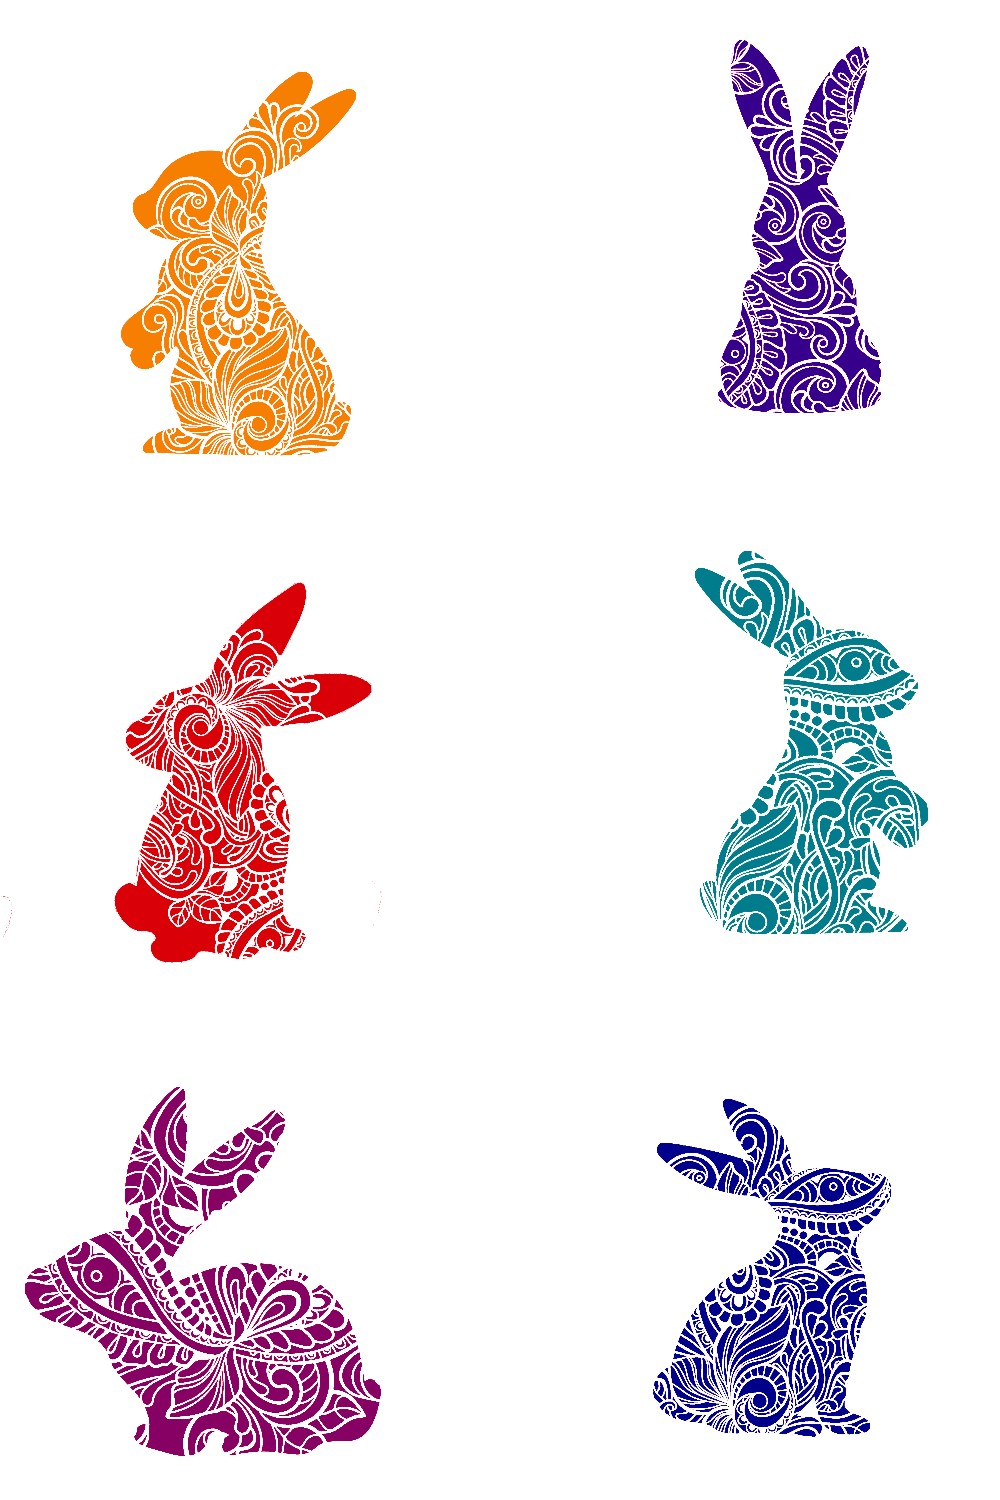 Decorative Bunny Set of 6 Stickers Muliti Colored Colorful Rabbit Animal SVG Files pinterest preview image.